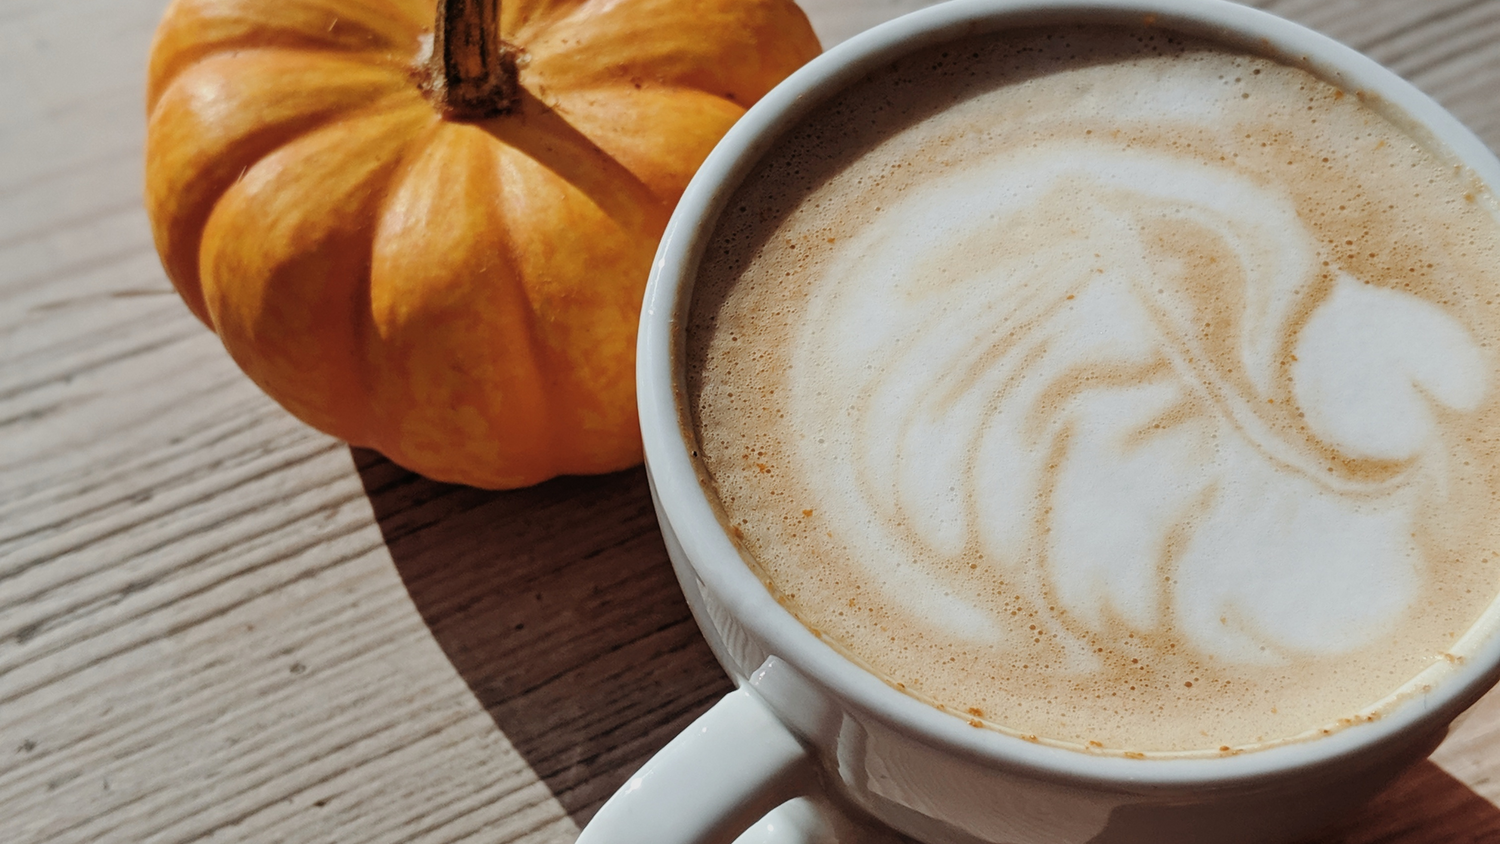 How to Make your own Cannabis Infused Pumpkin Spice Latte at Home